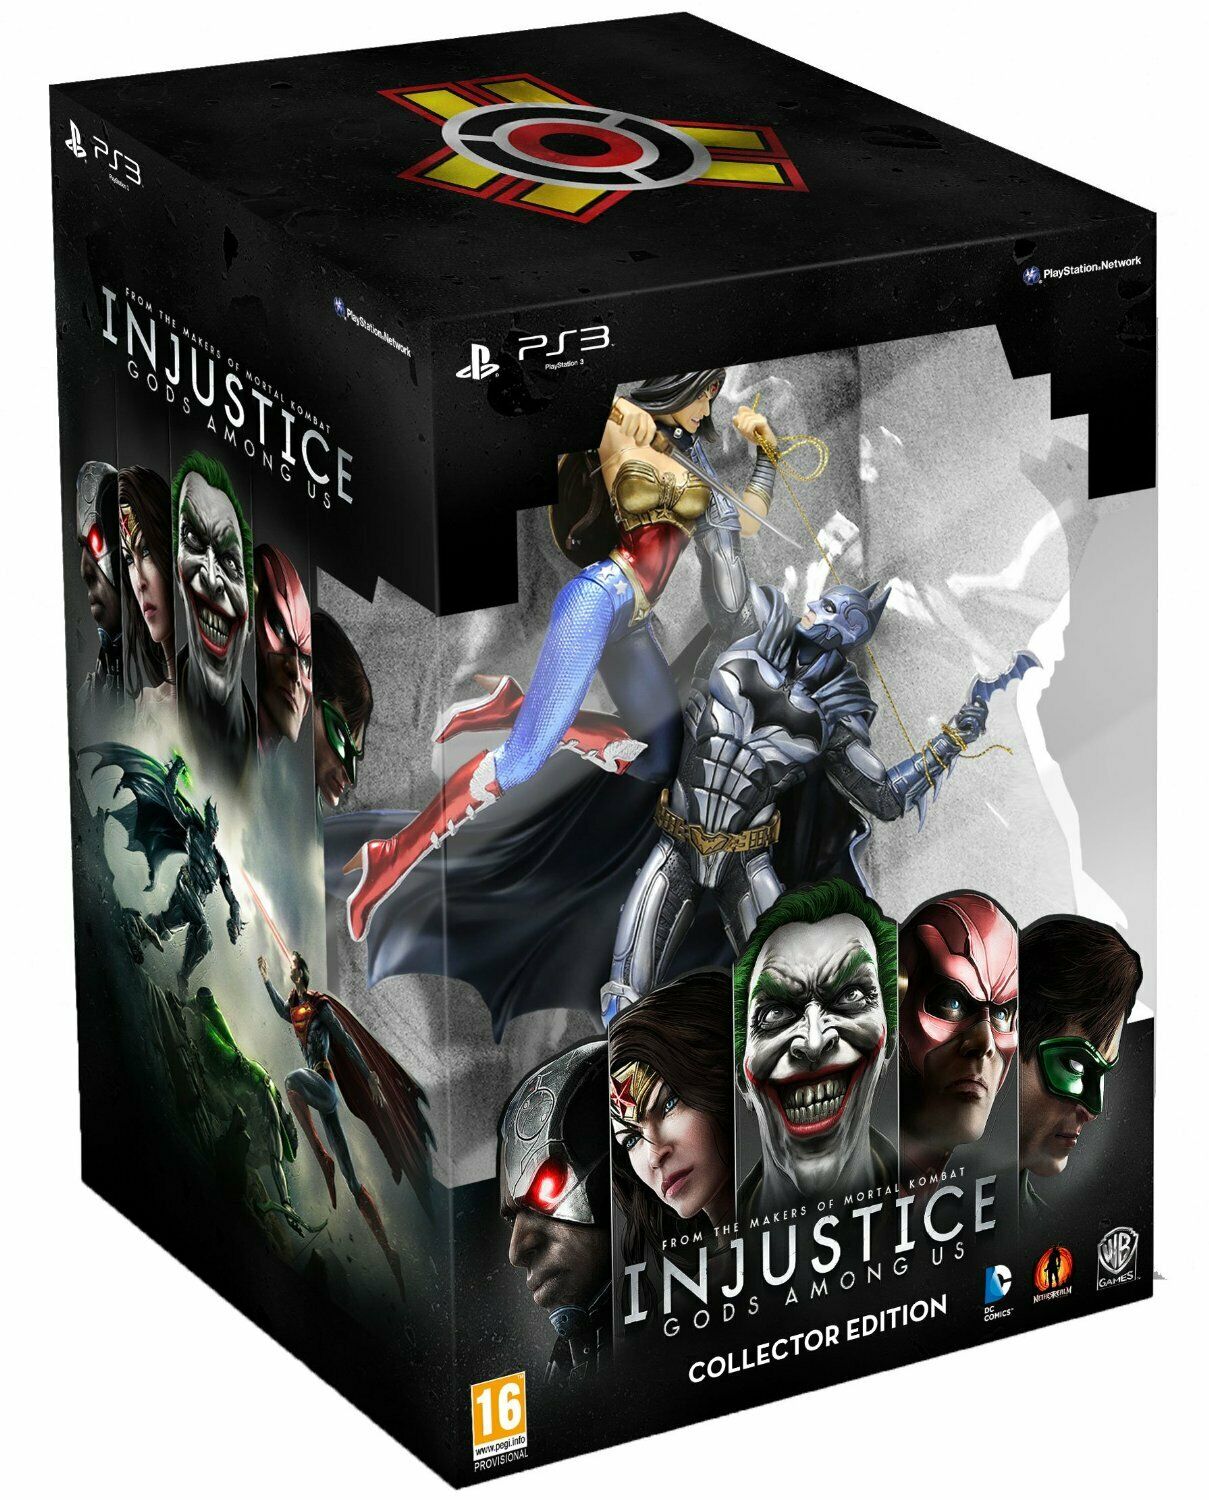 Injustice Gods Among Us Collectors Edition (PS3)